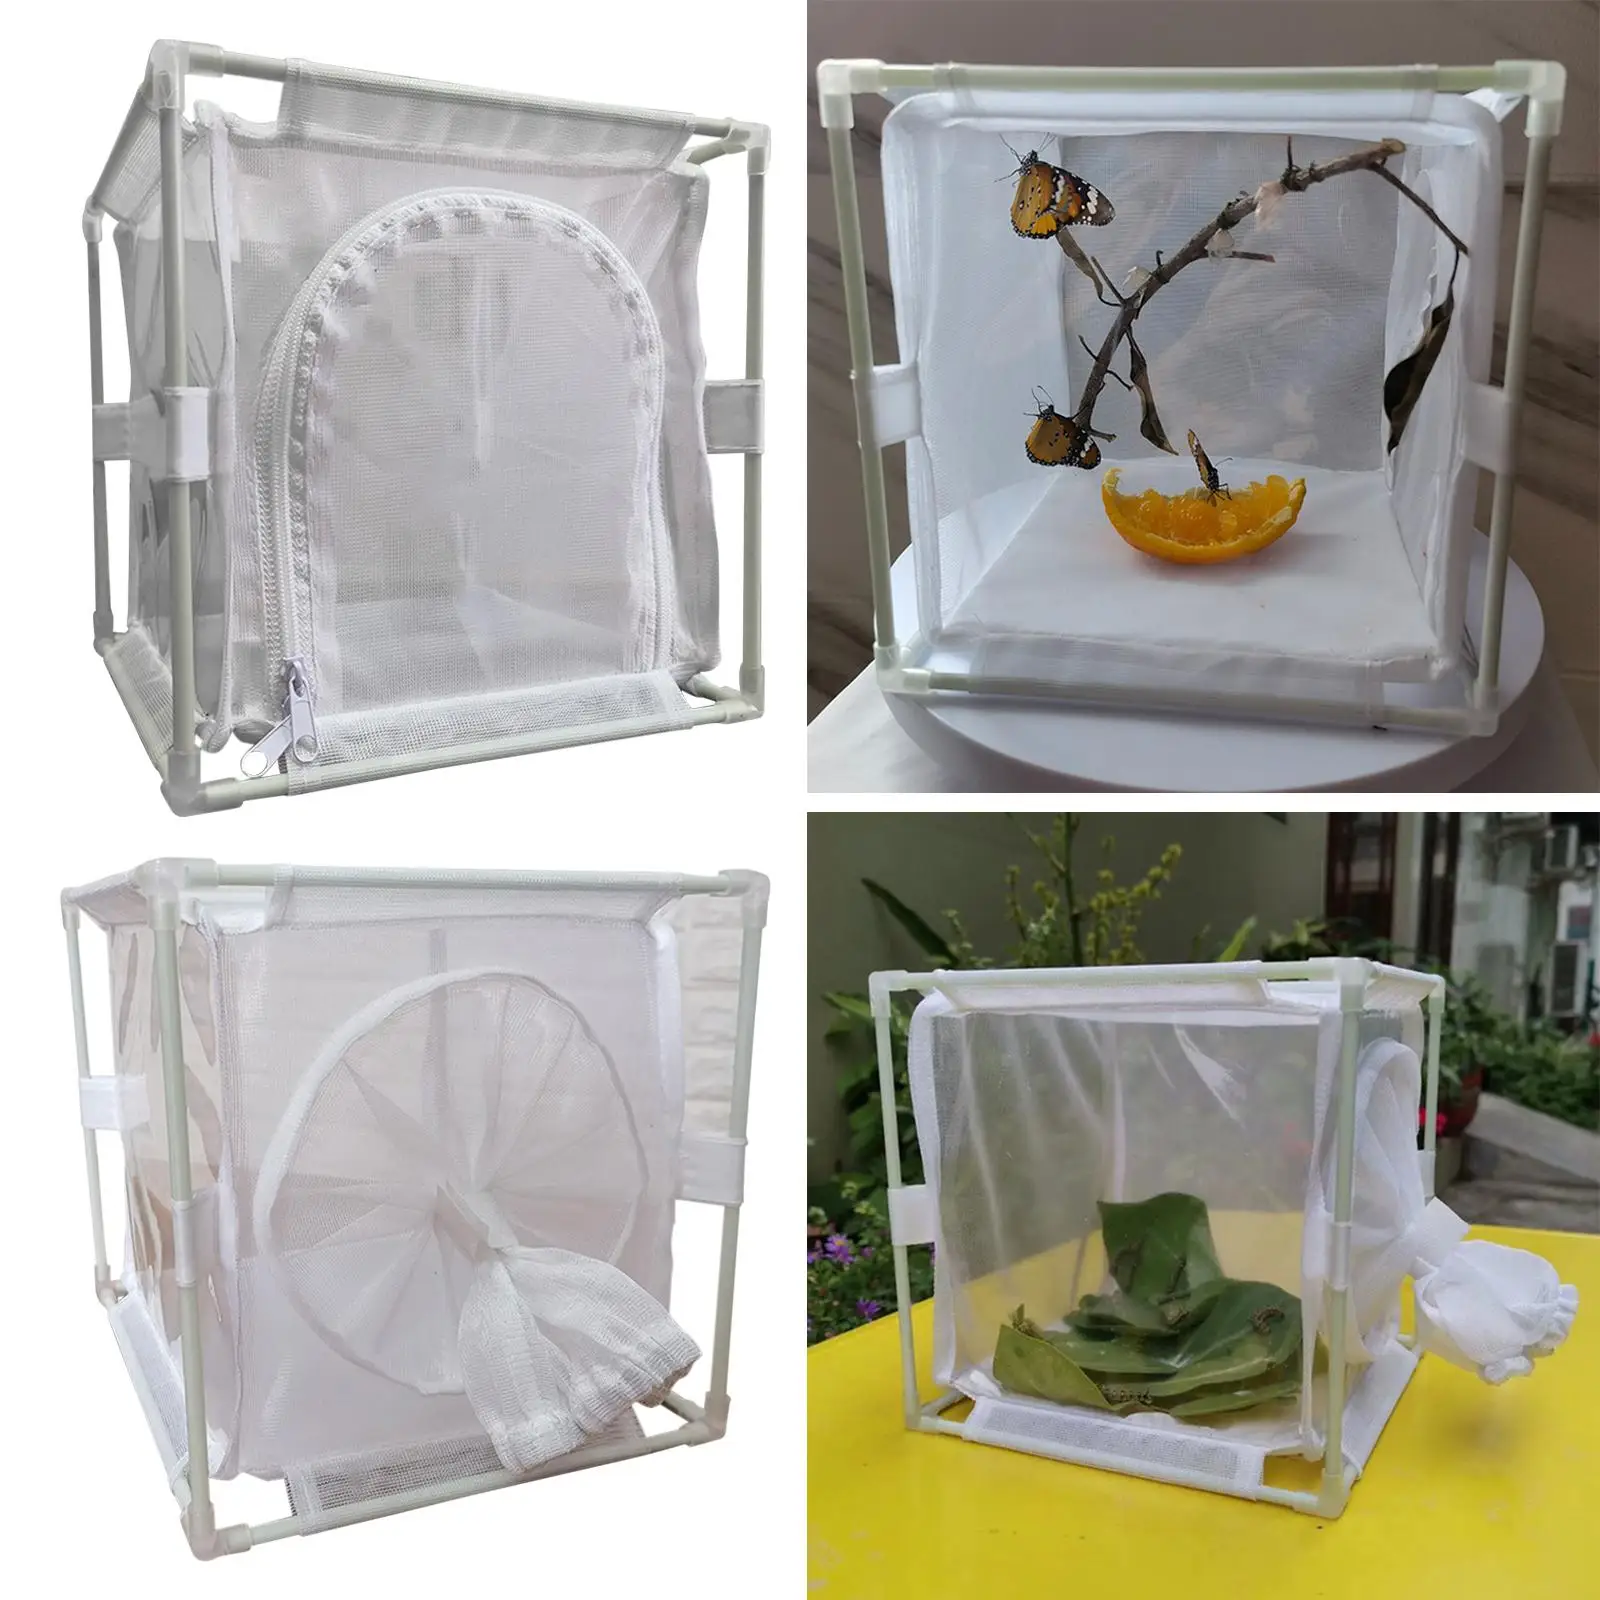 Shade Cages Detachable Reusable Multi Use Ventilation Observation Cage Net Cage for Yard Greenhouse Outdoor